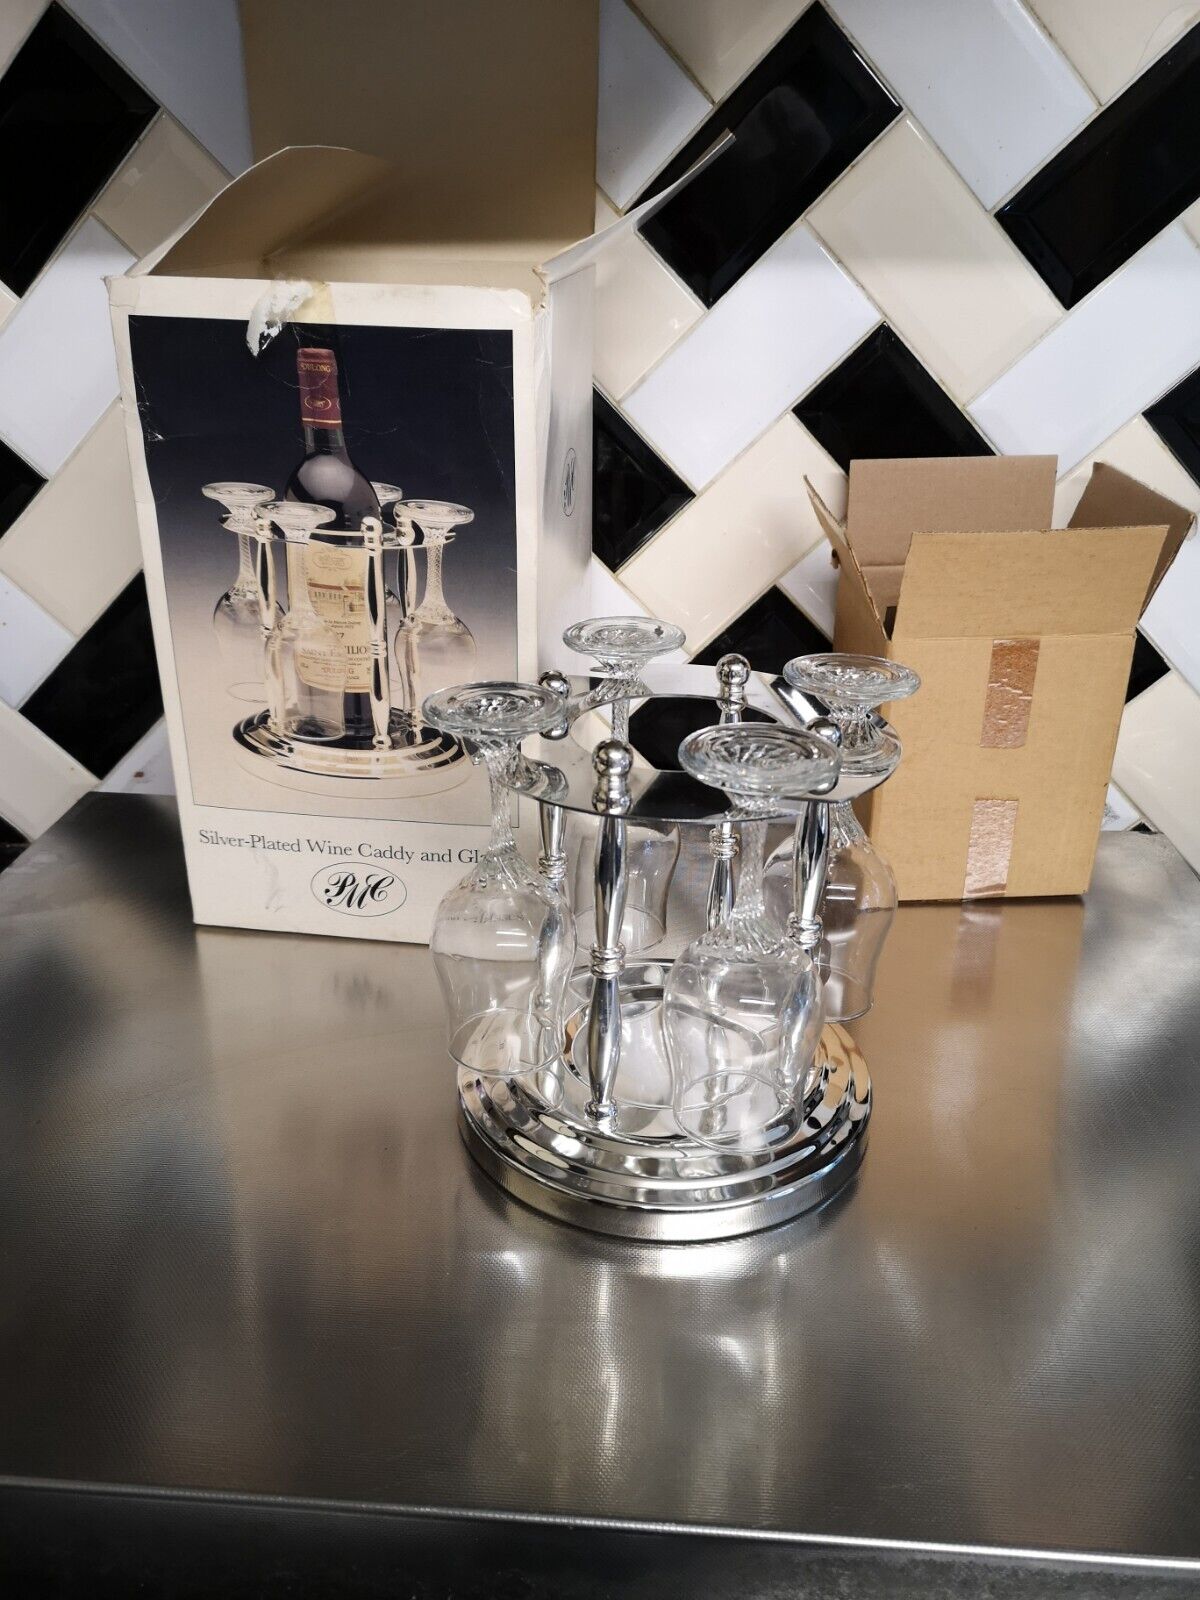 Antique Valuations: Vintage Boxed Silver Plated Wine Caddy with twist stem glasses